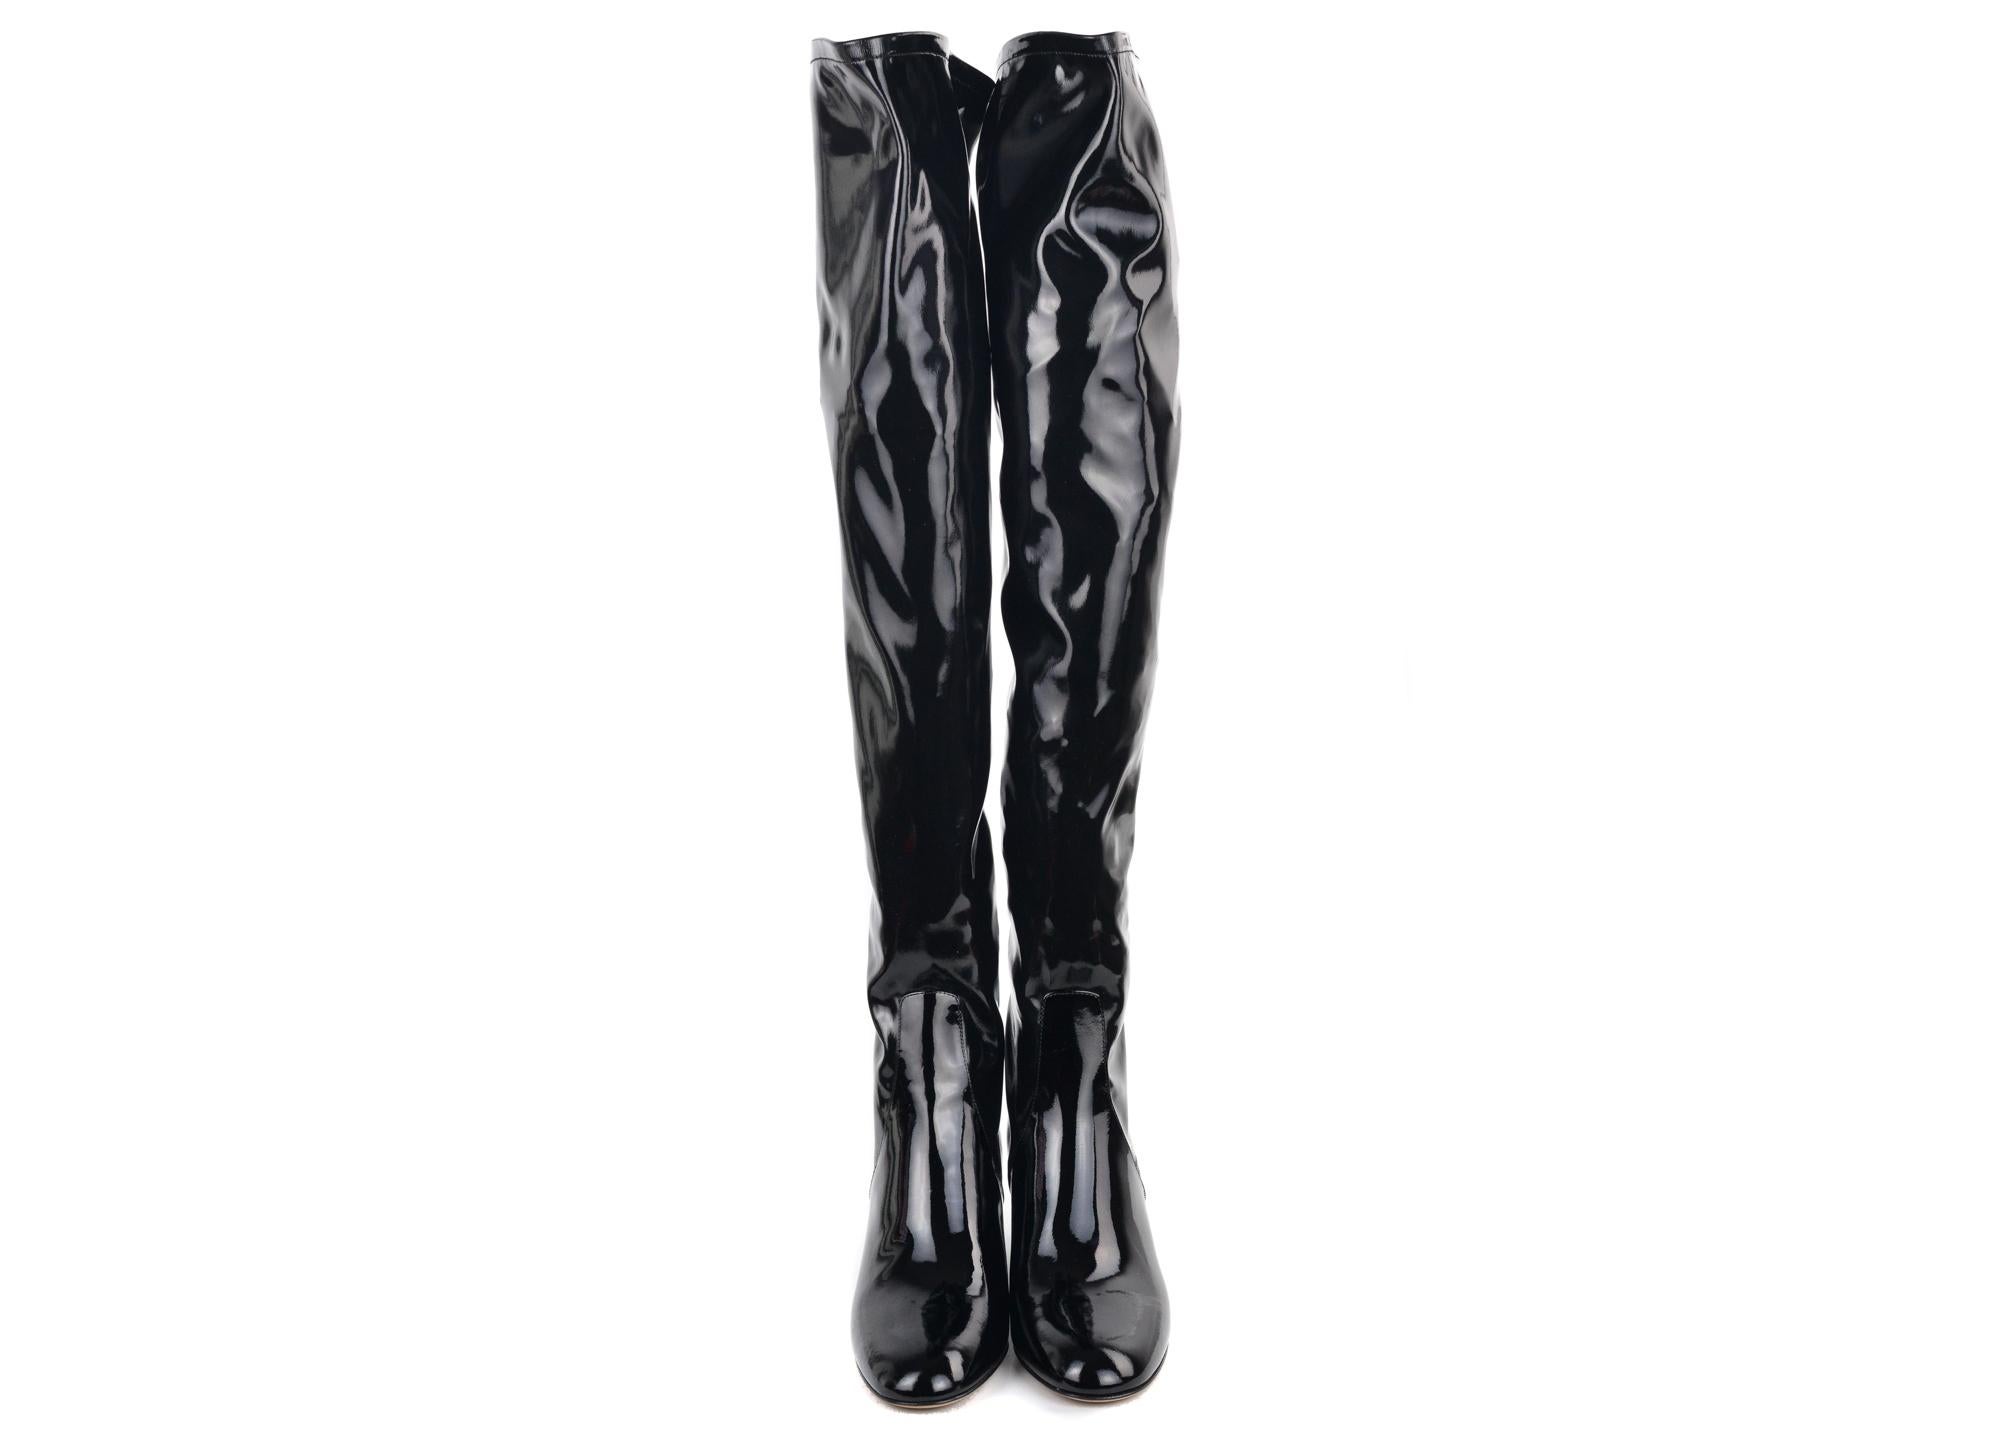 Solidify the final statement in your Valentino Thigh High Boots. This heeled boots feature rich high shine patent leather, a 2.5 inch chunky heel, and a tonal back zipper. You can pair these heels with a tonal bodycon dress for the ultimate